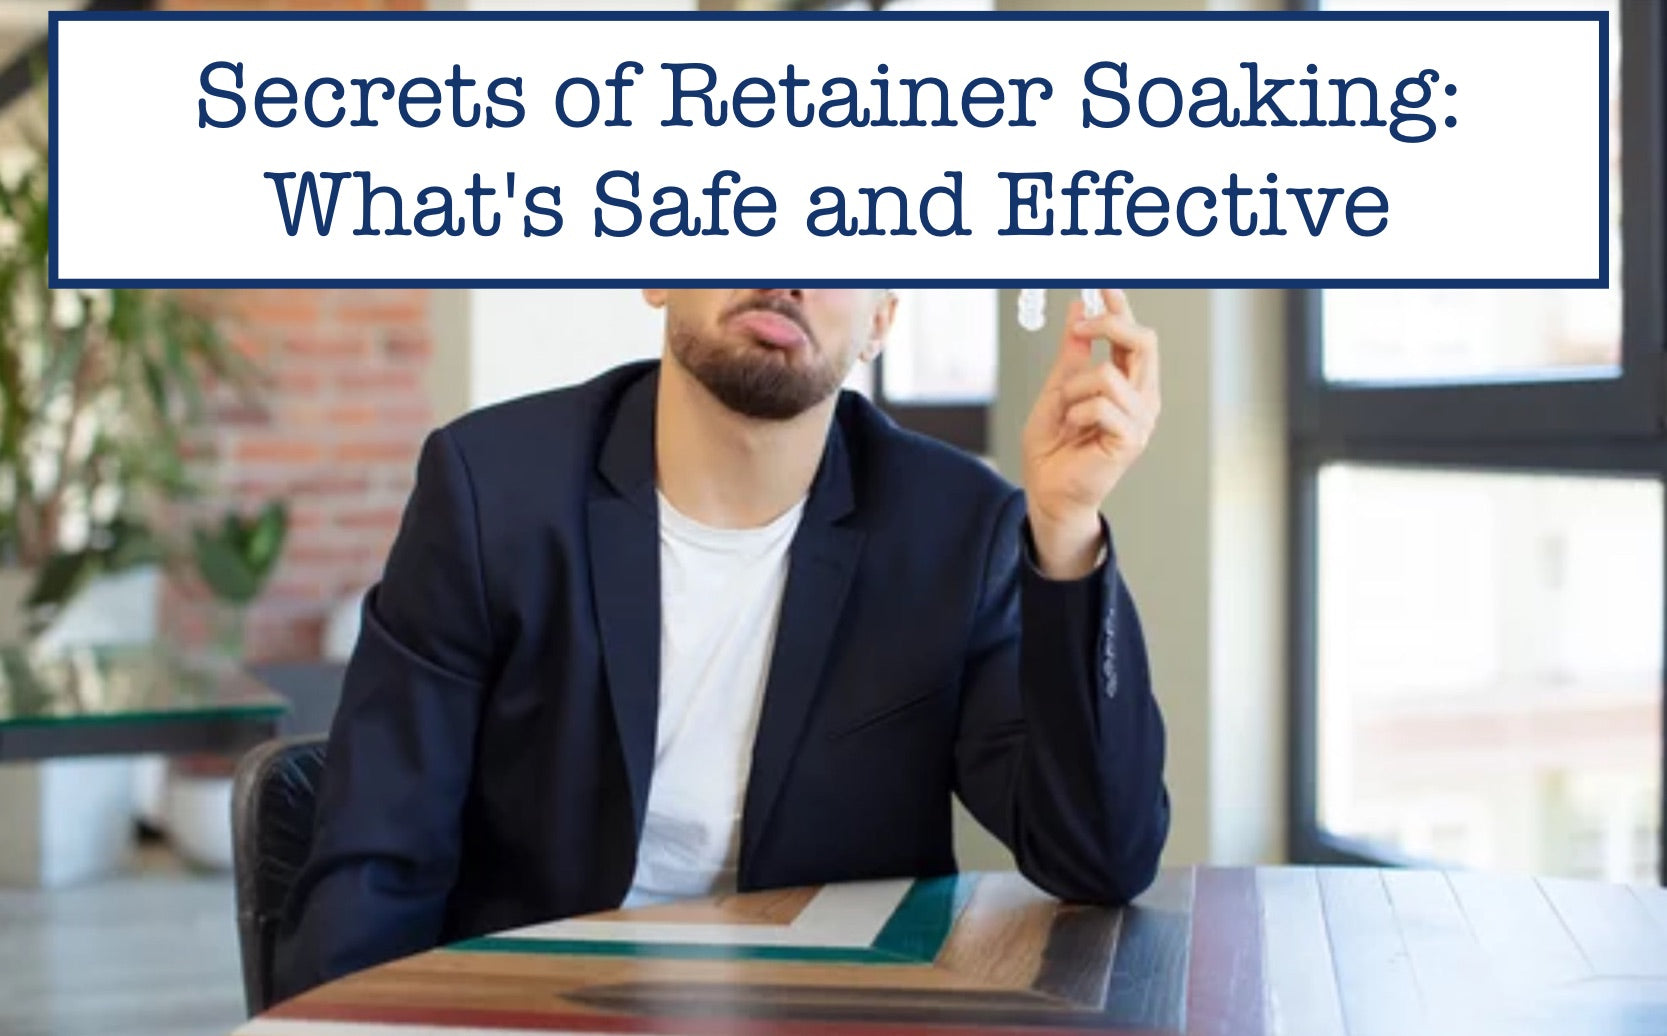 Secrets of Retainer Soaking: What's Safe and Effective